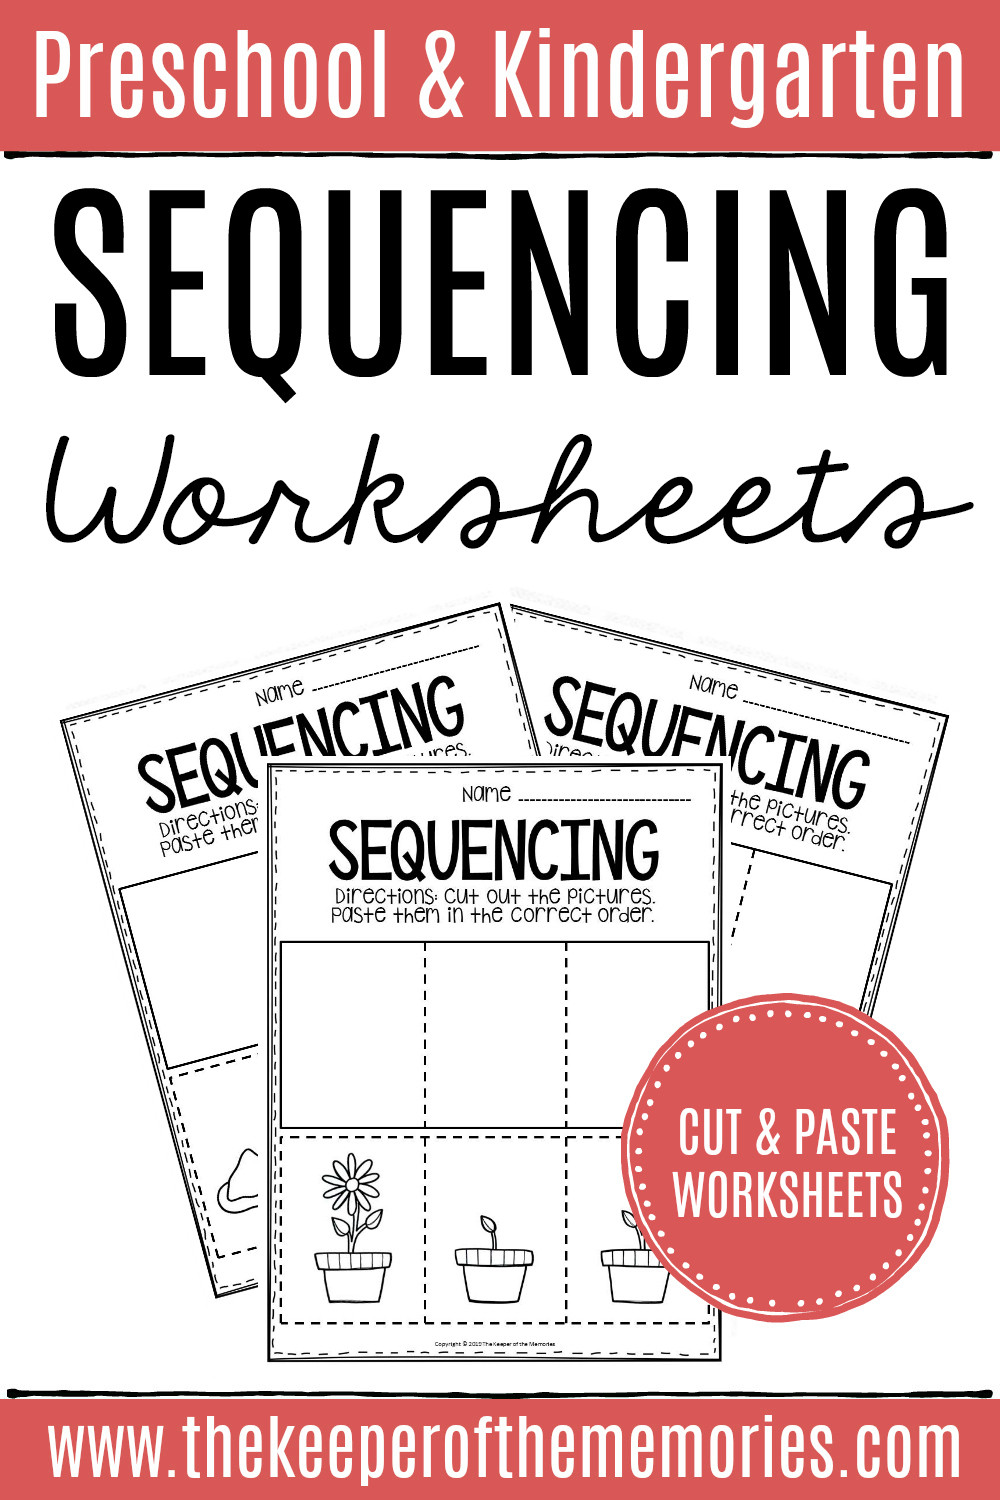 Printable Sequencing Worksheets 3 Step Sequencing Worksheets the Keeper Of the Memories